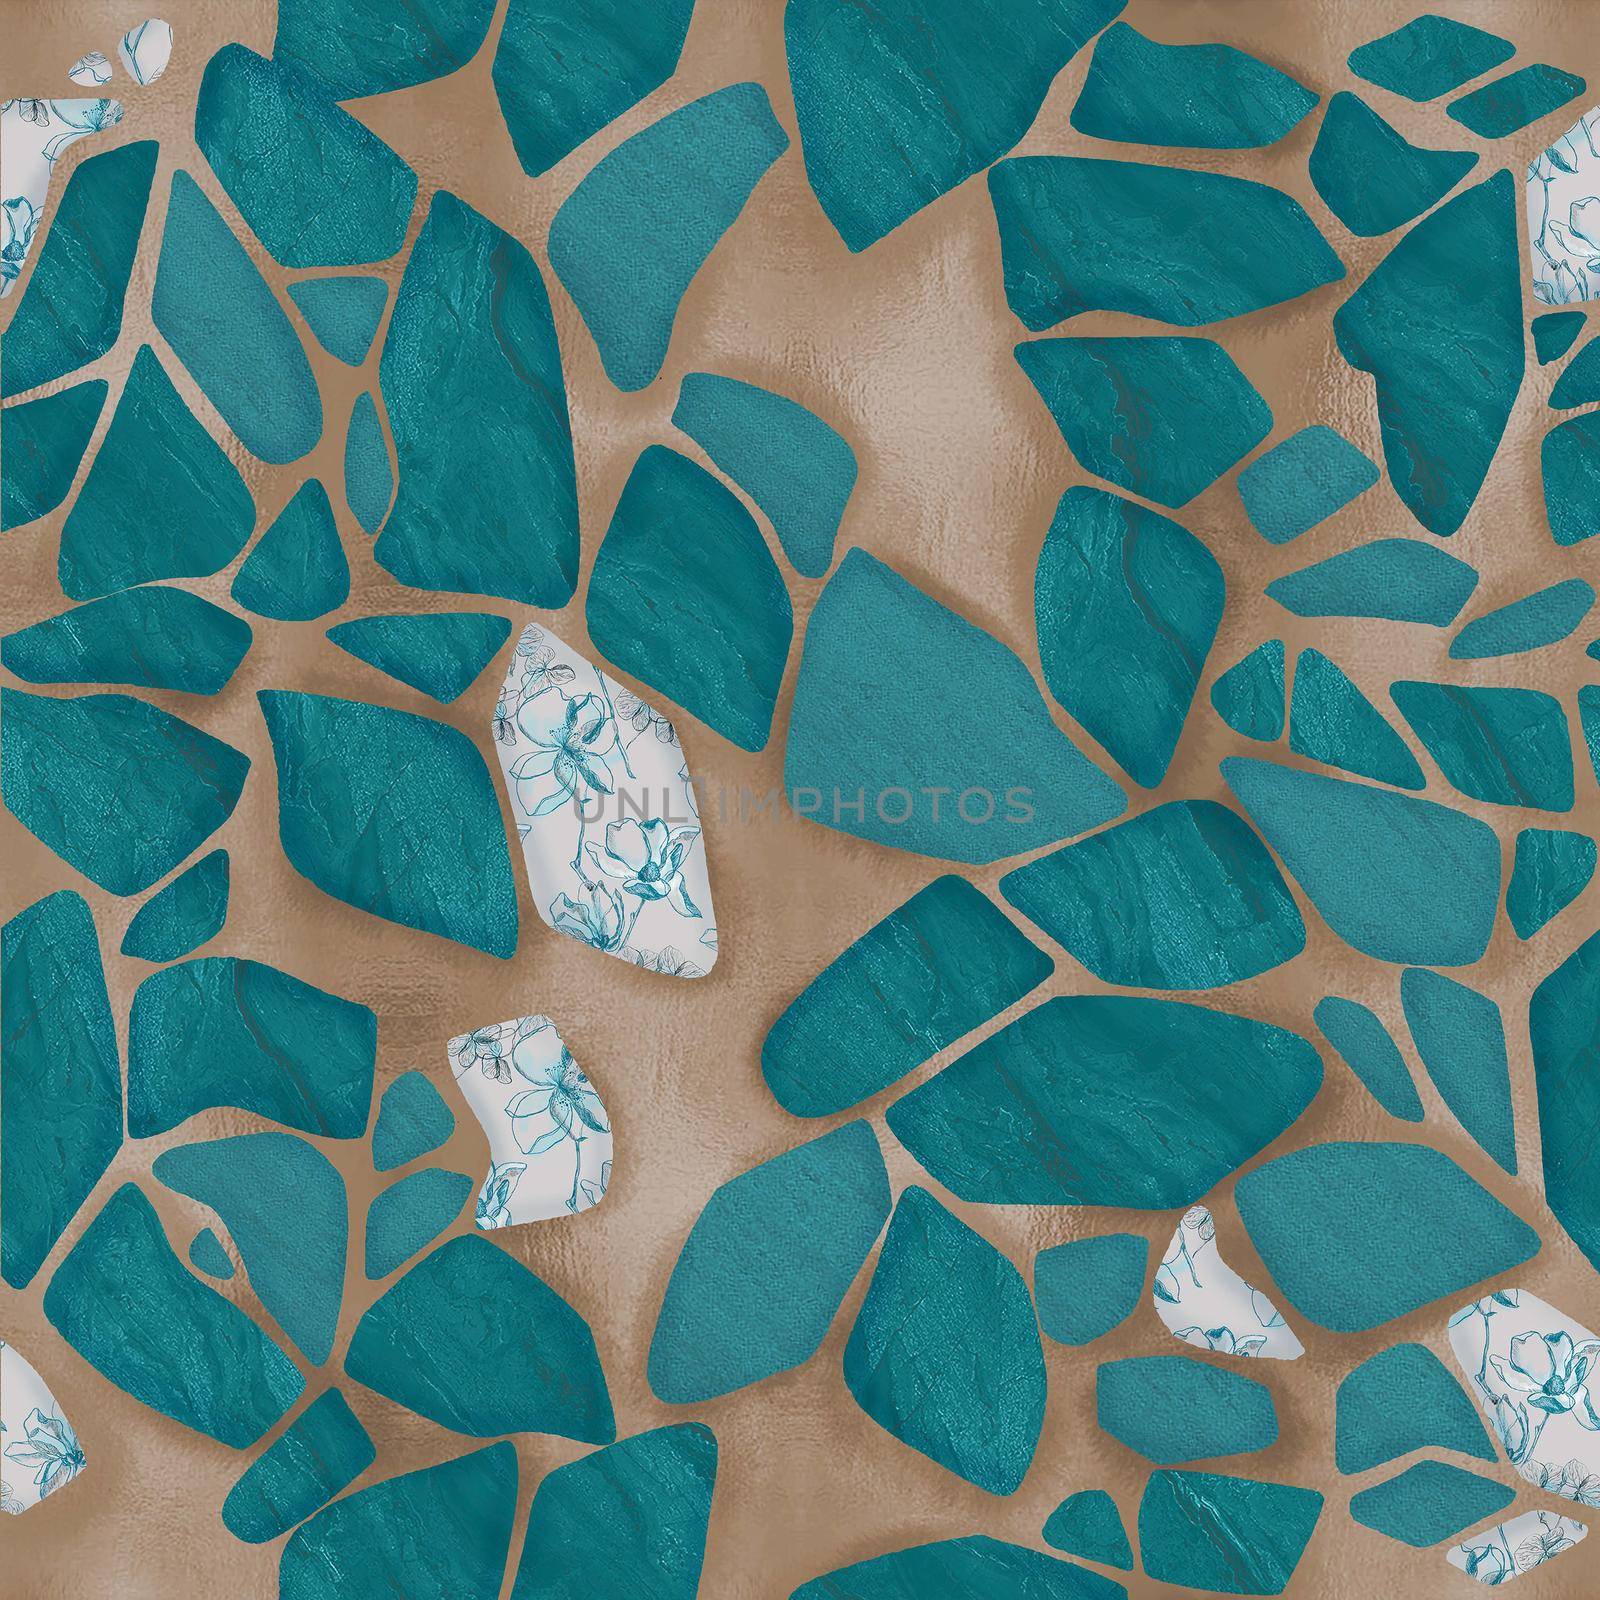 Green and beige seamless pattern with cracked ceramic tile texture. Kintsugi style hand drawn illuastration by fireFLYart